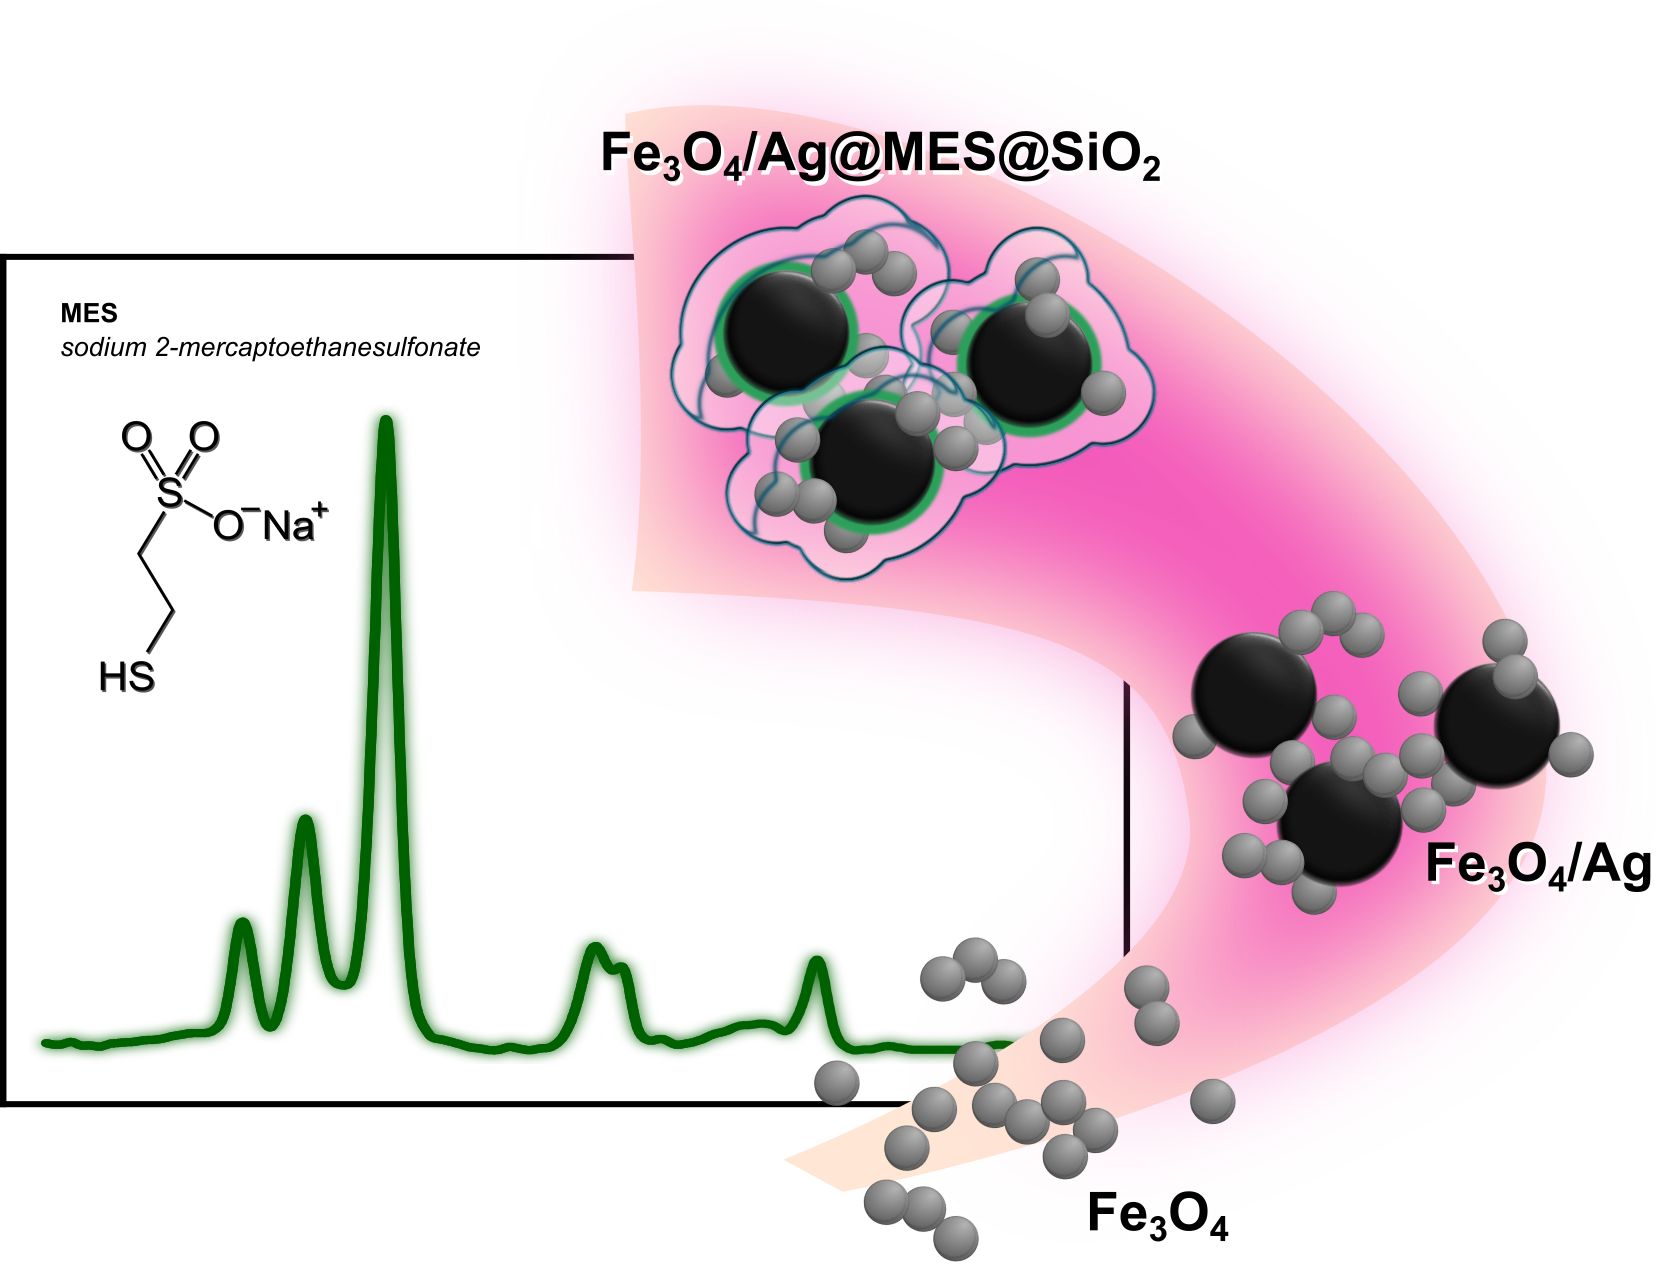 Reduced Self-Aggregation and Improved Stability of Silica-Coated Fe3O4/Ag SERS-Active Nanotags Functionalized With 2-Mercaptoethanesulfonate